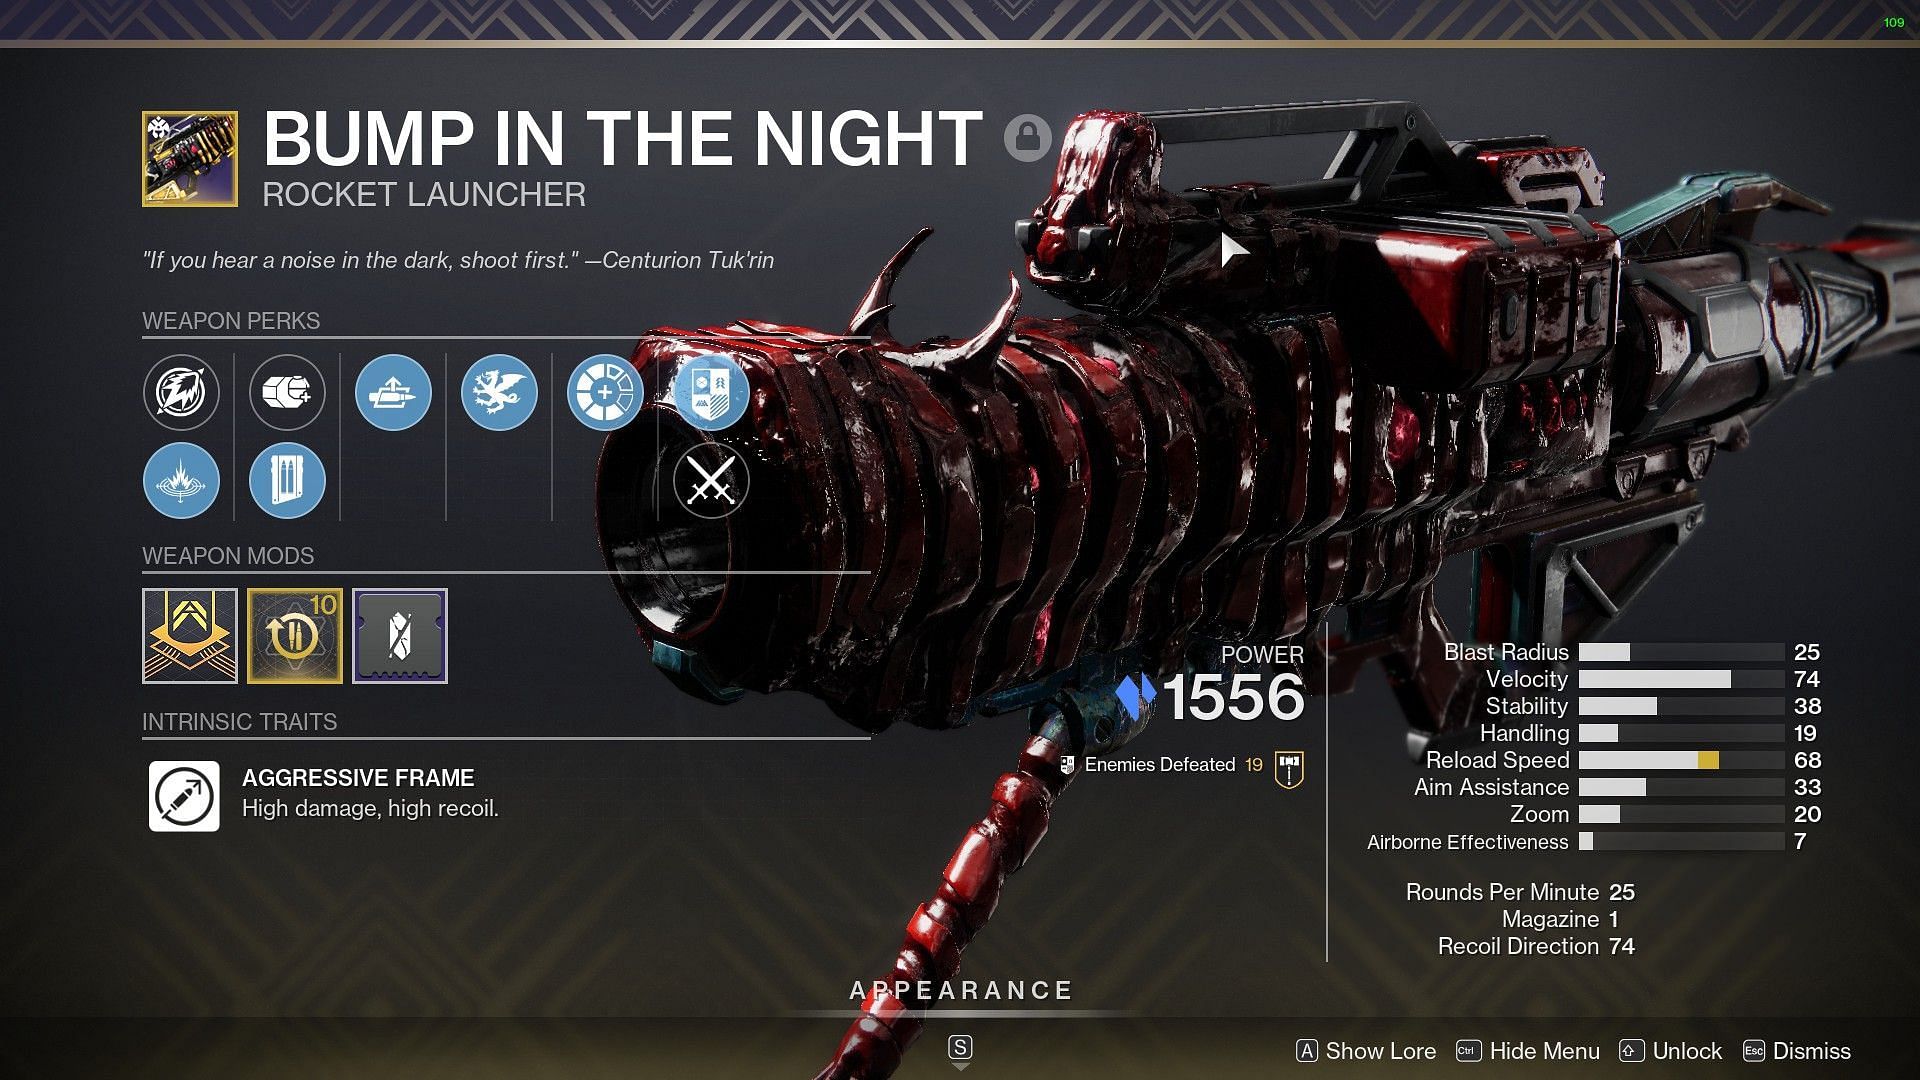 How to get Bump in the Night Rocket Launcher in Destiny 2